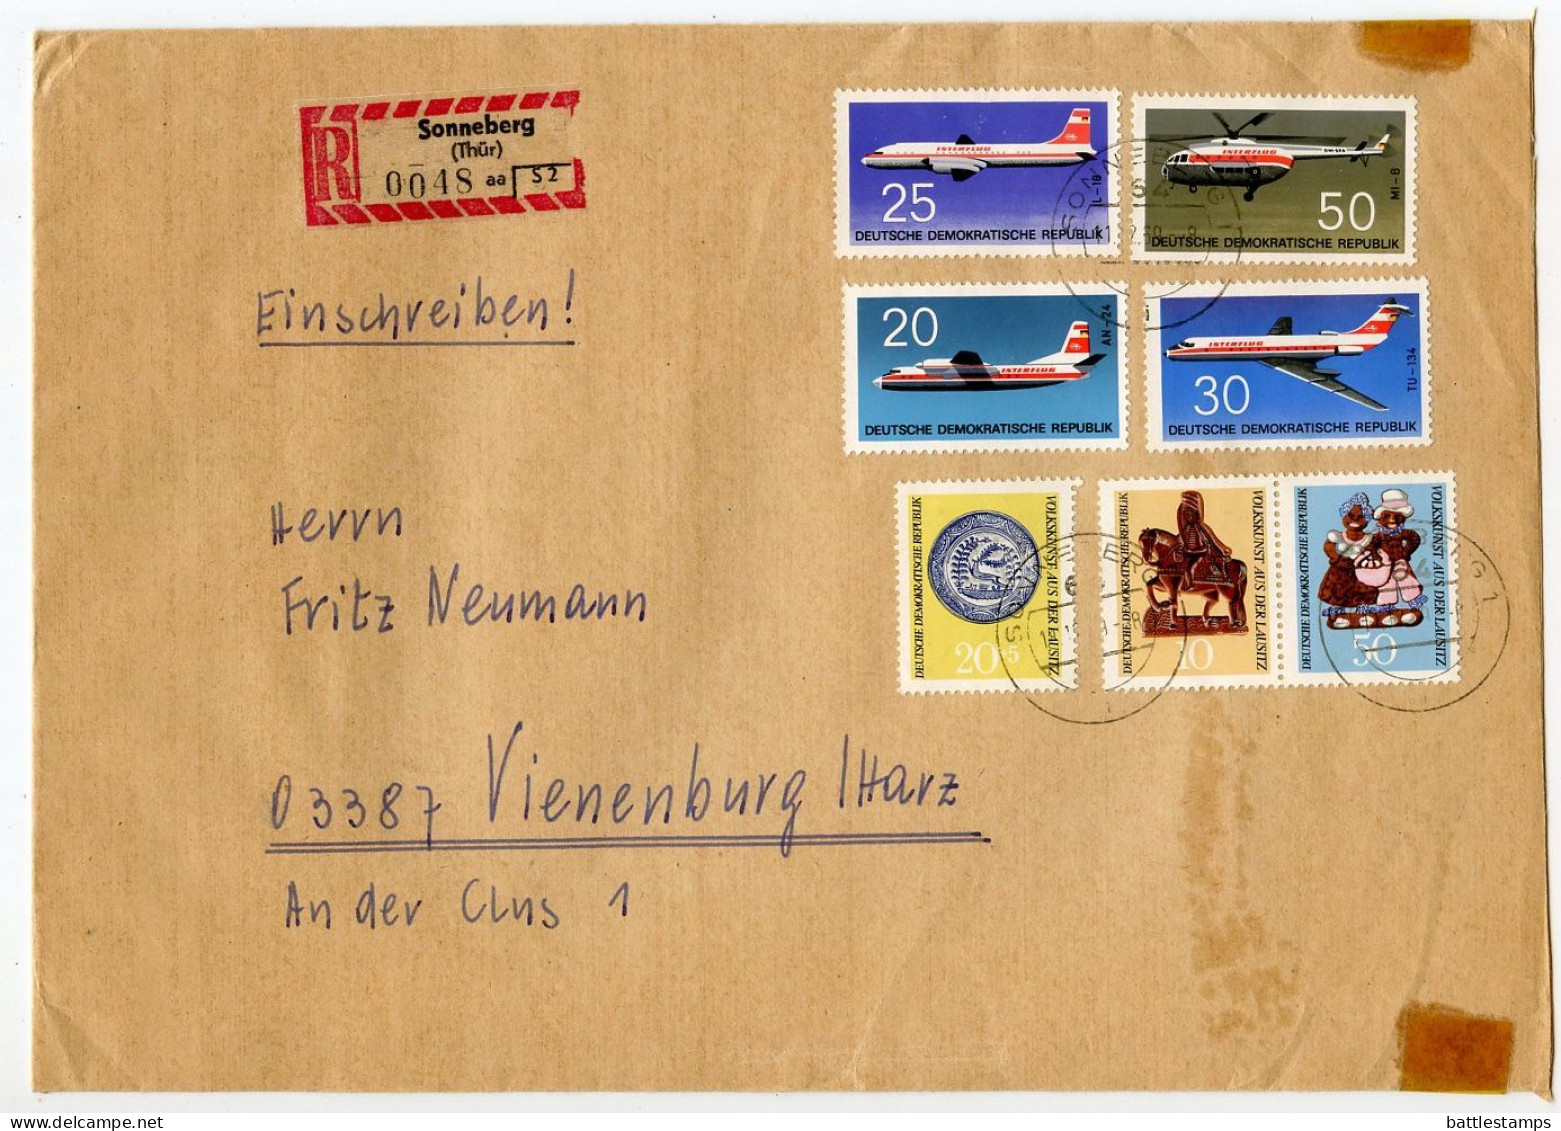 Germany, East 1969 Registered Cover; Sonneberg To Vienenburg; Folk Art & Aviation Stamps - Airplanes & Helicopter - Lettres & Documents